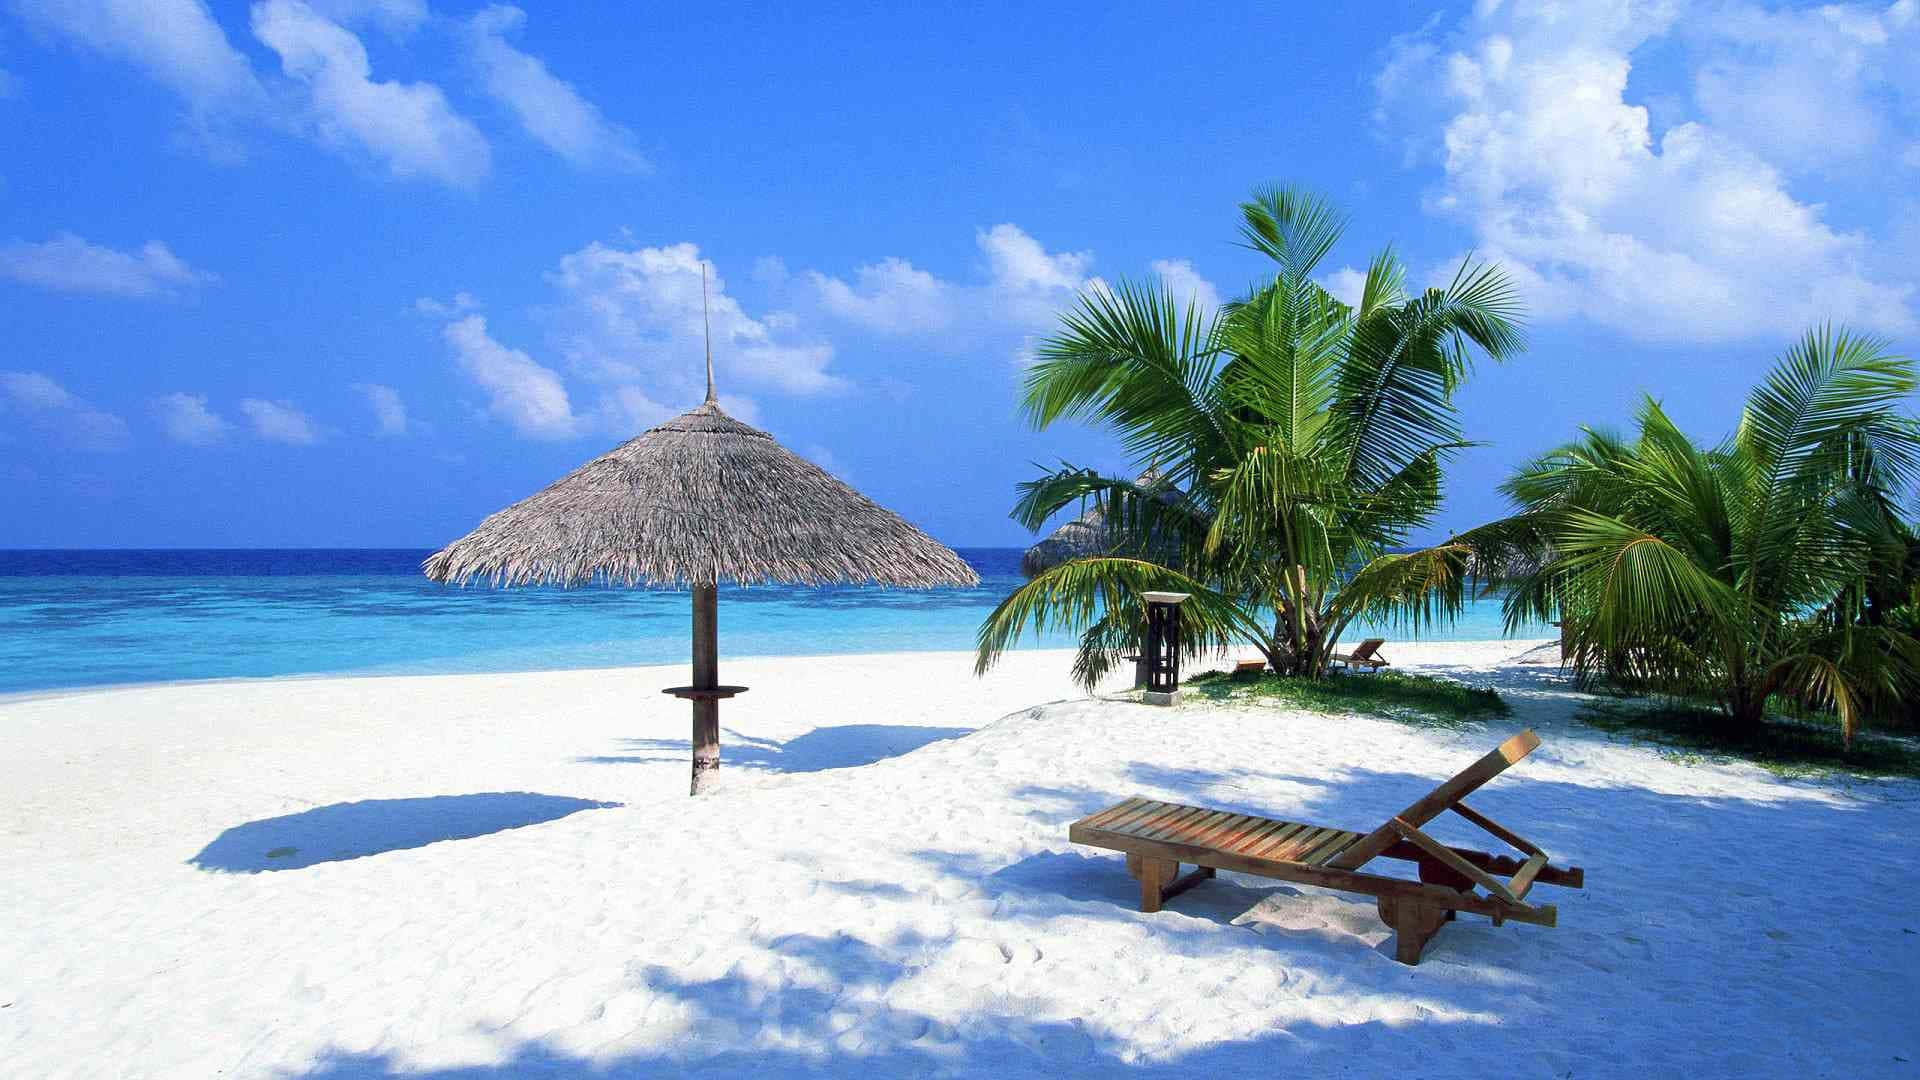 a white sandy beach with palm trees and a thatched umbrella